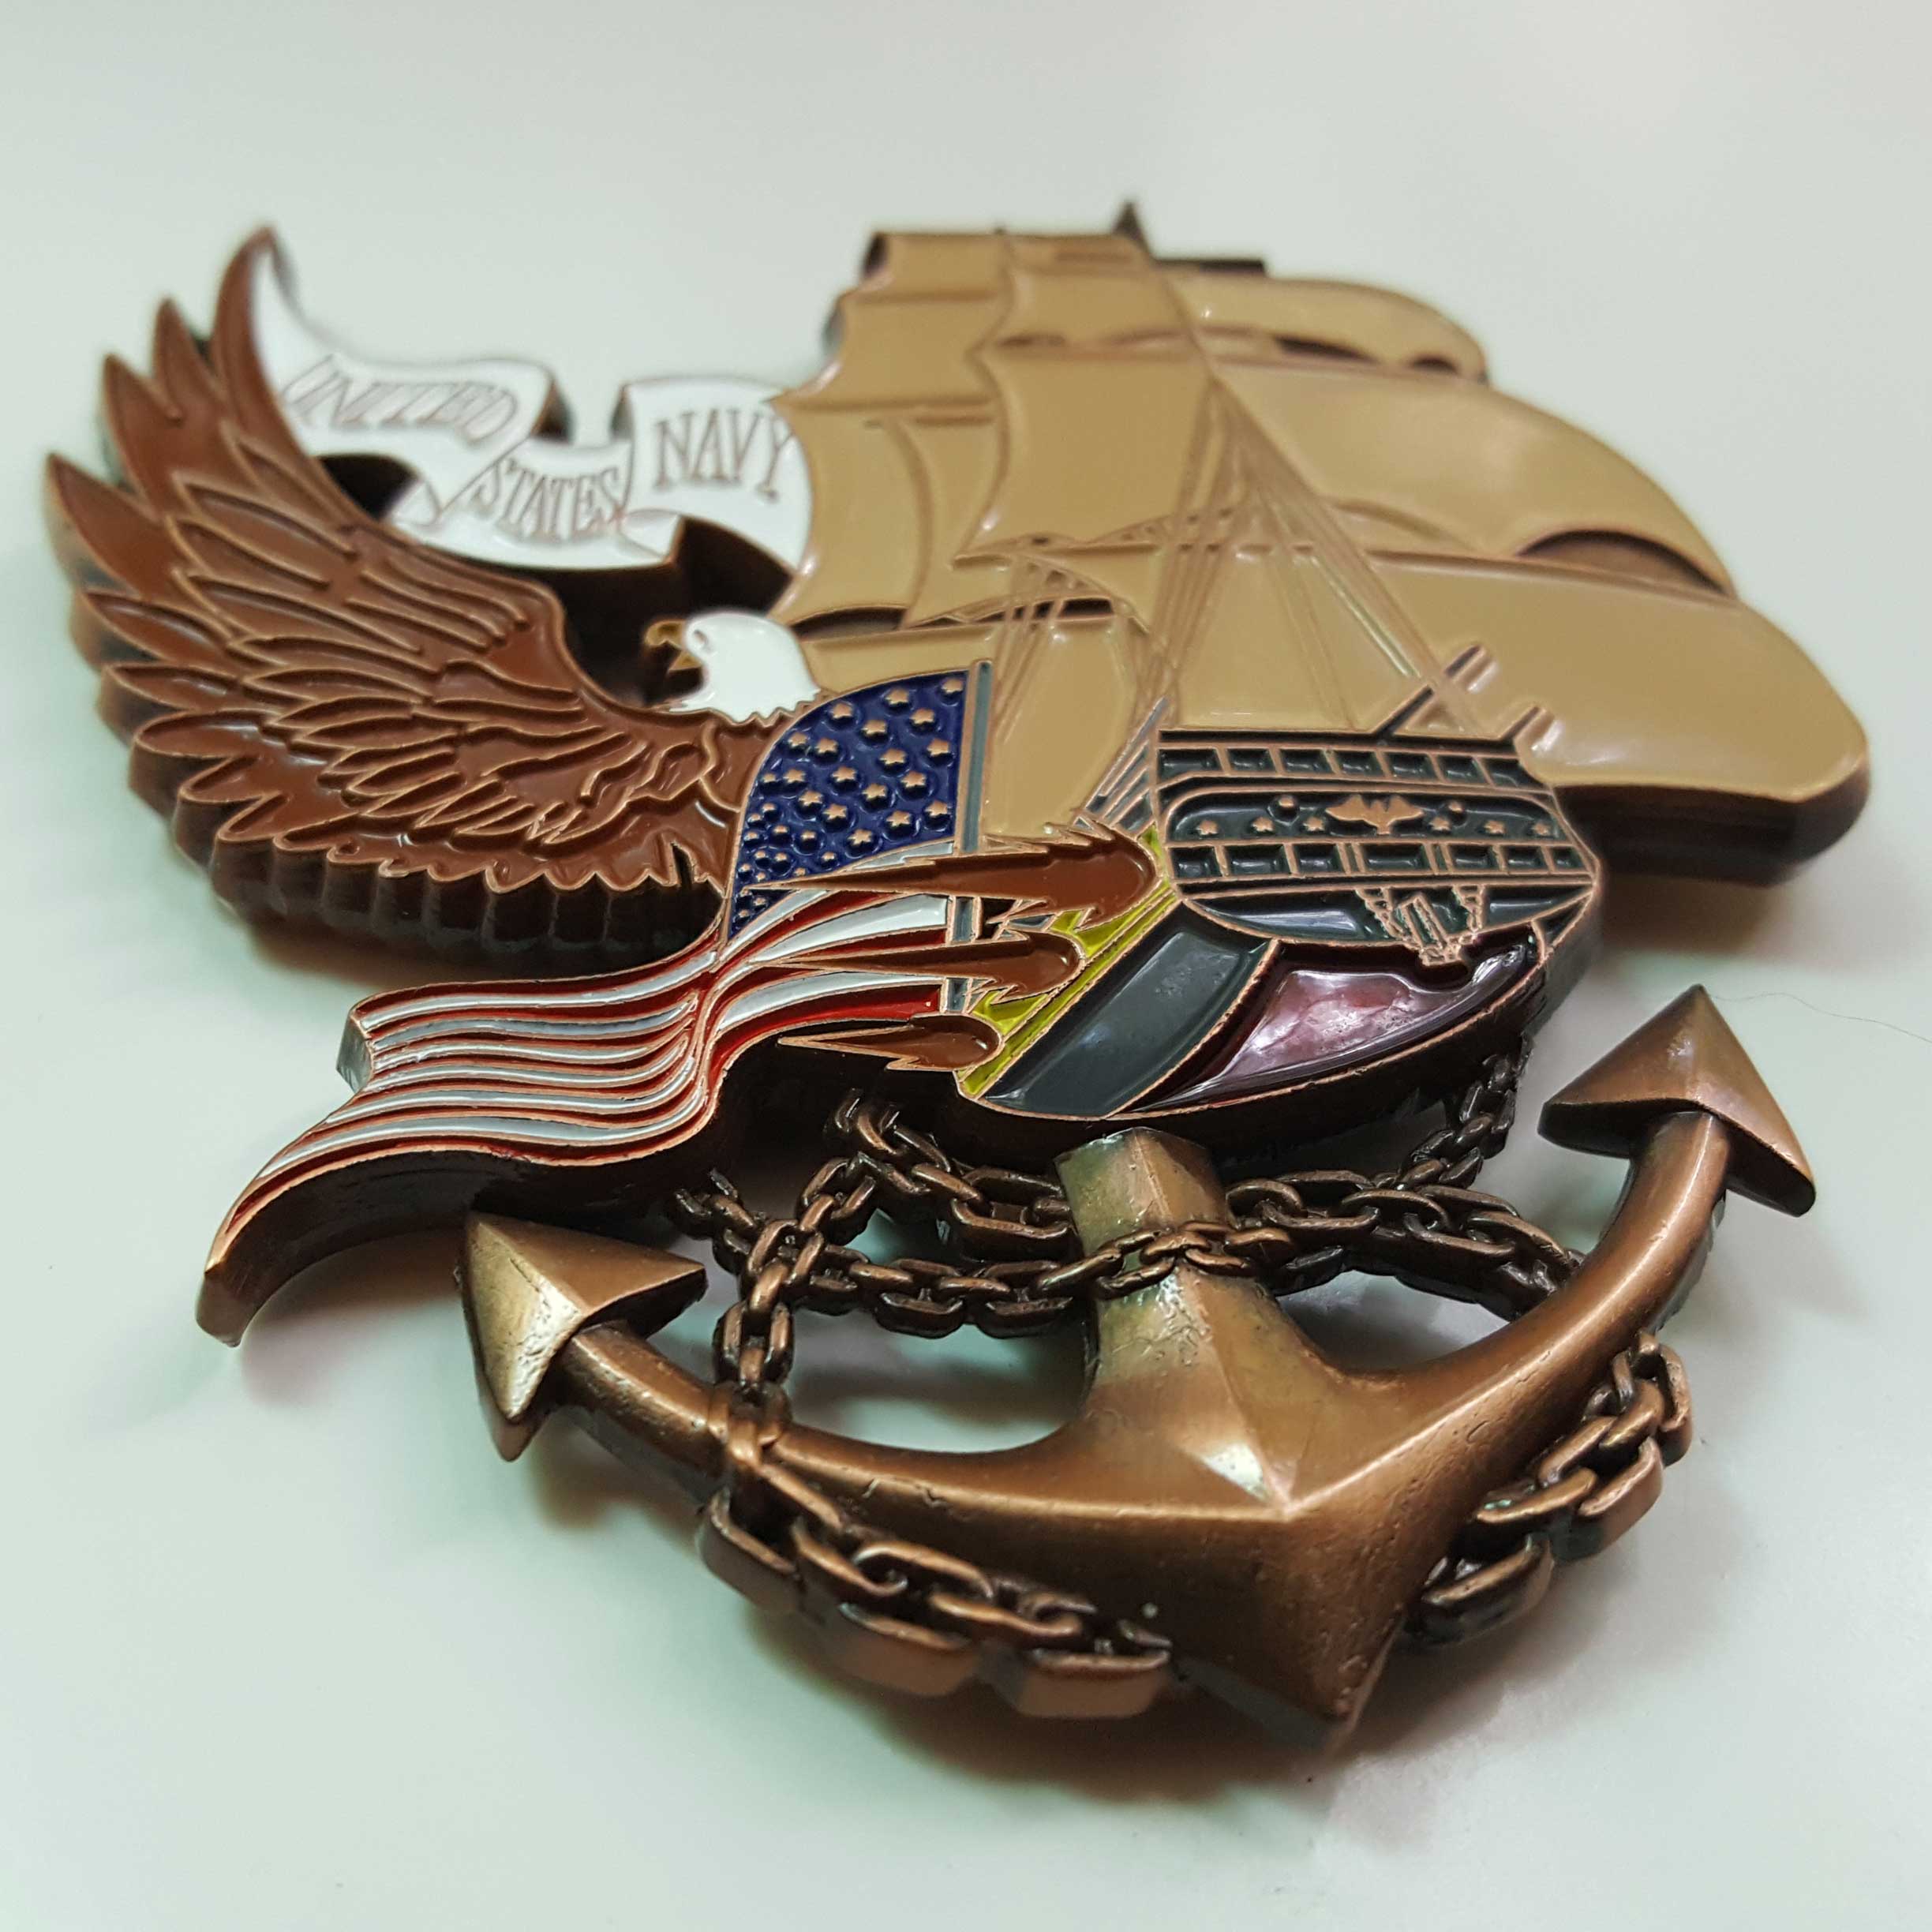 navy ship coin, navy challenge coins, navy command coins, challenge coin contractor, coins customized, challenge coins custom, military challenge coins,